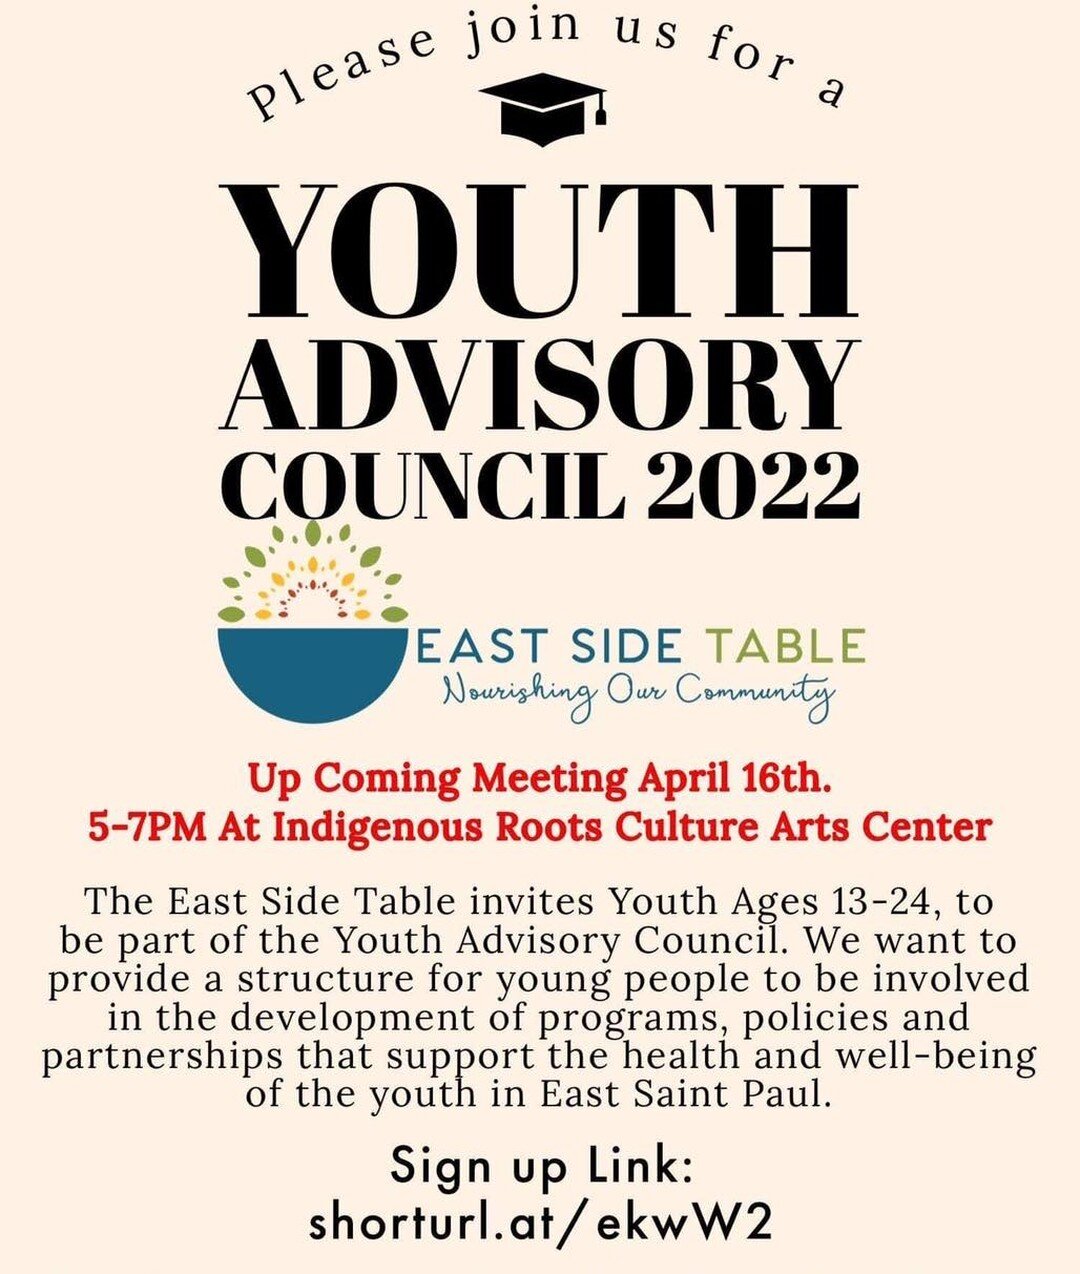 CALLING ALL YOUTH AGES 13-24!!!

East Side Table invites you to be apart of the Youth Advisory Council 2022.
We want to hear youth voices participating in development of programs, policies and partnerships.
Sign up link:

shorturl.at/ekwW2

April 16t